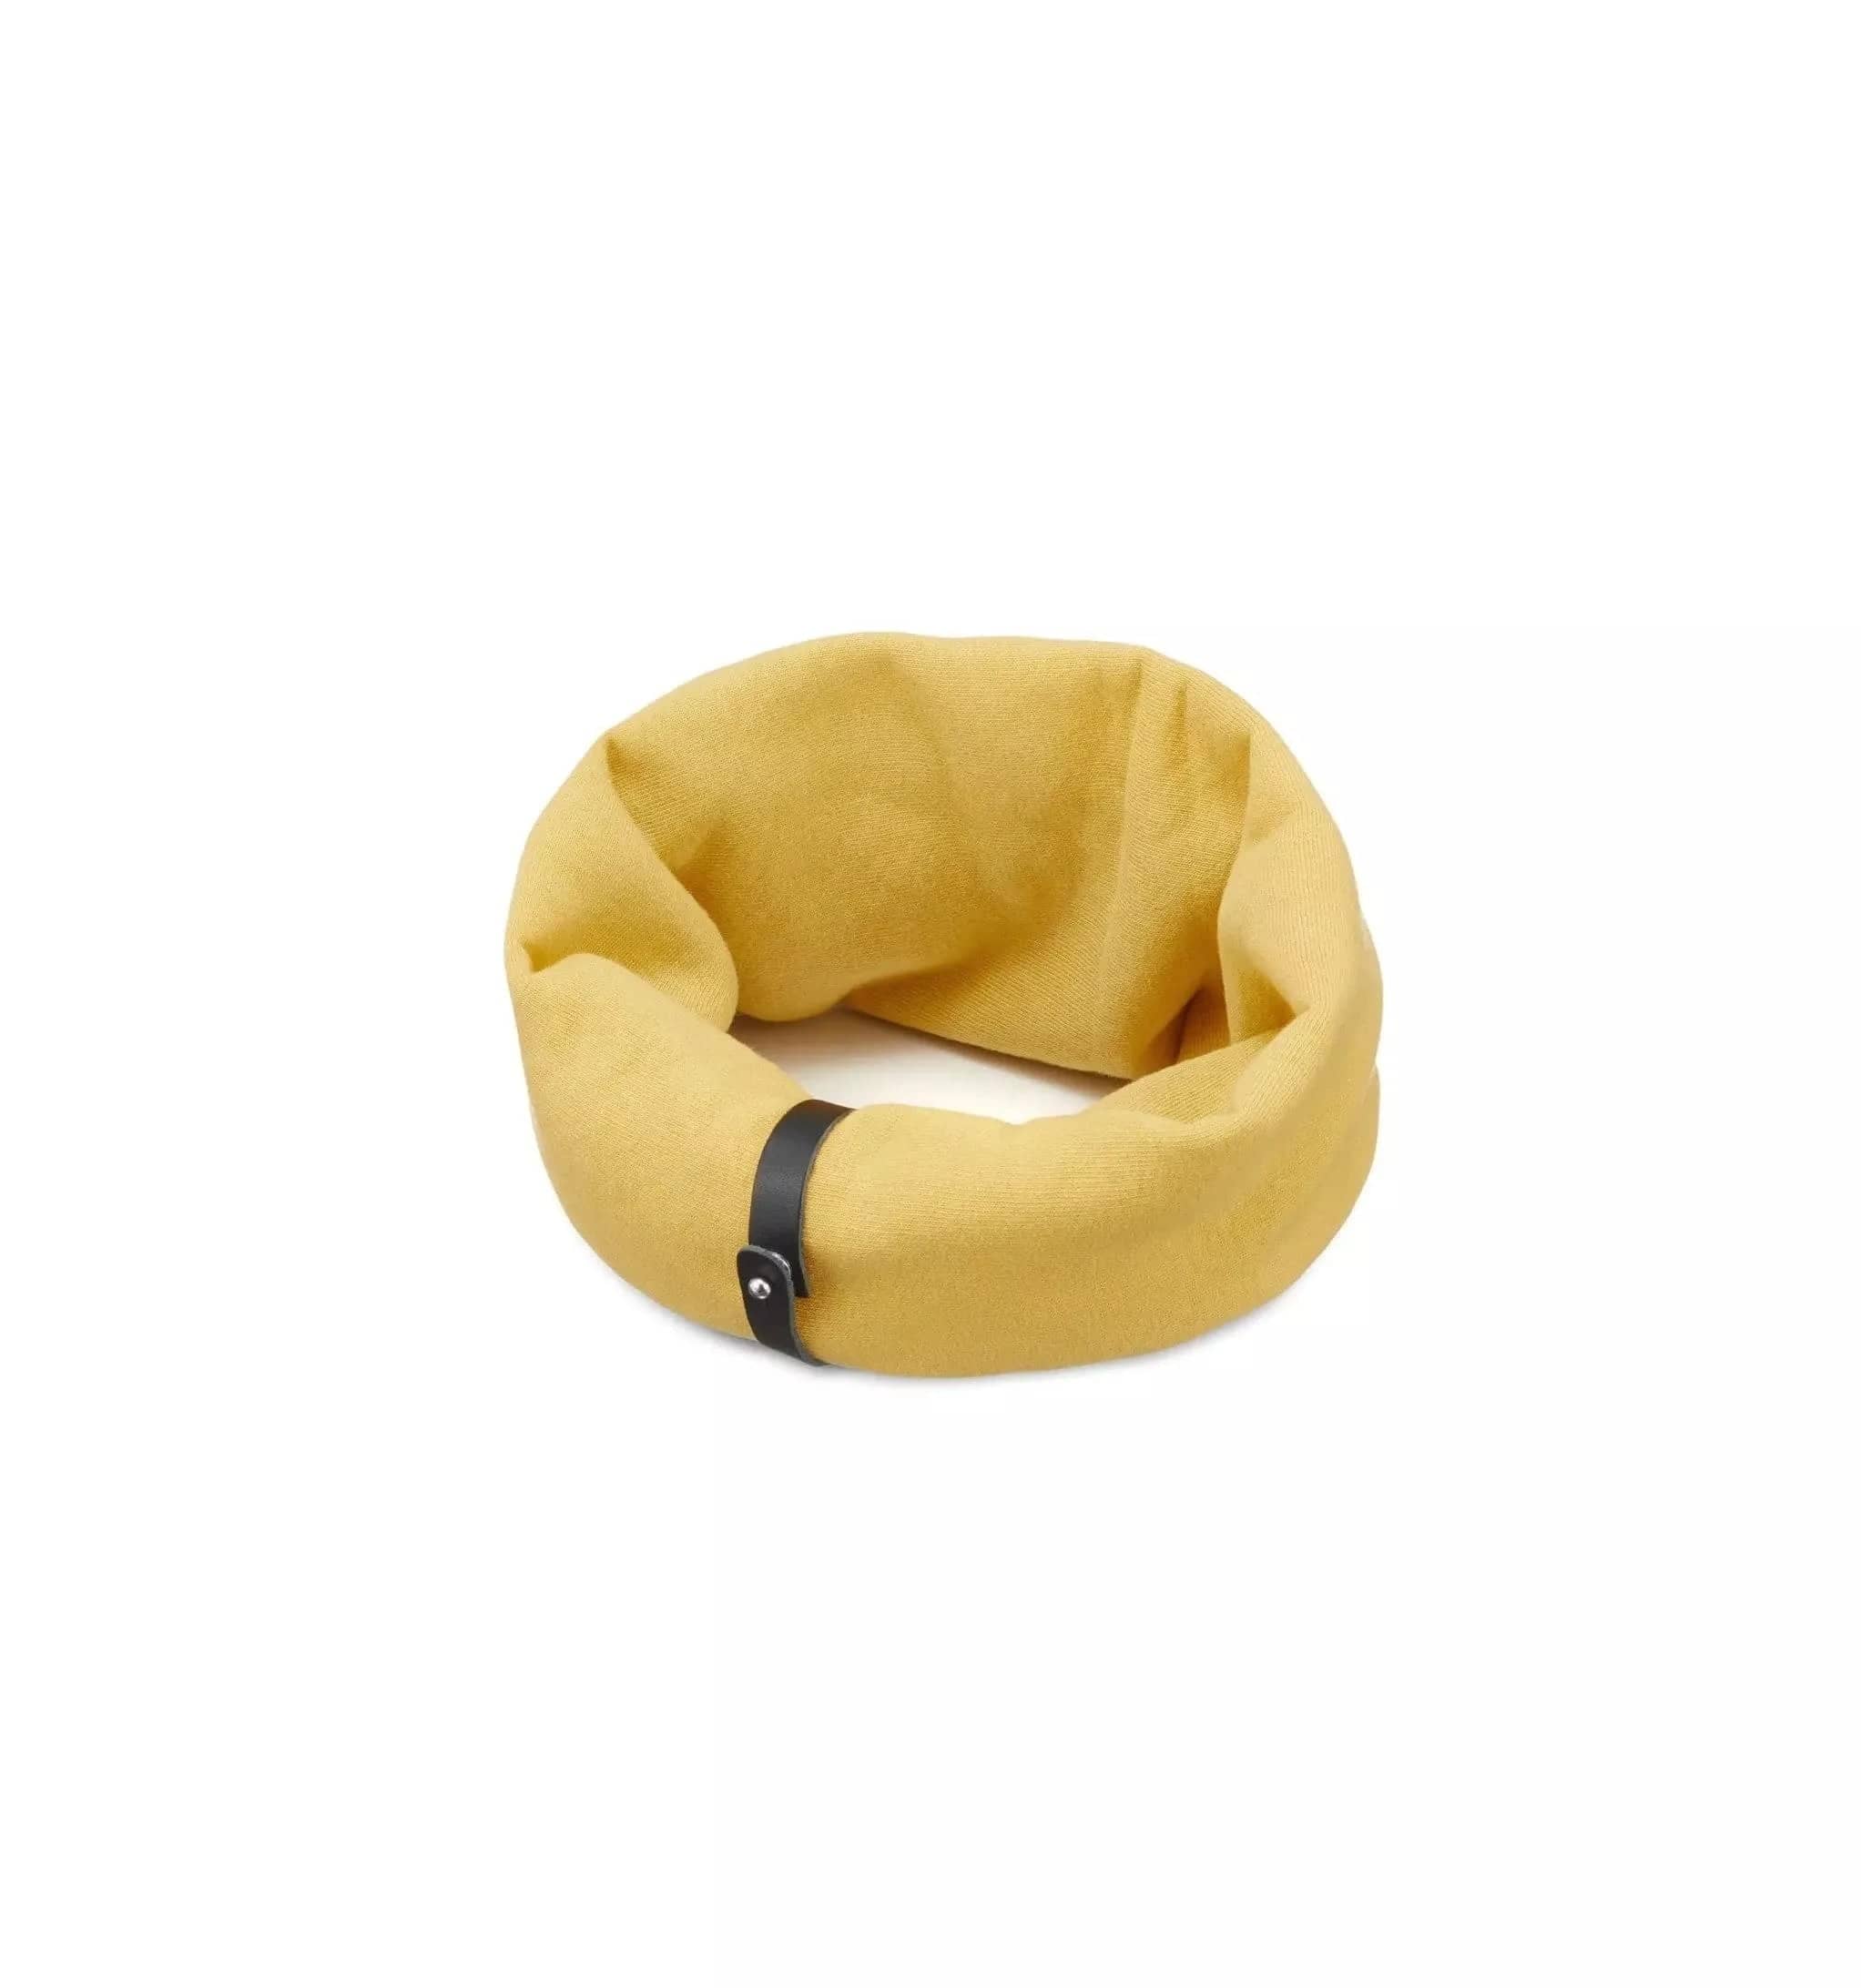 Comfortable and warm neck accessory for dogs